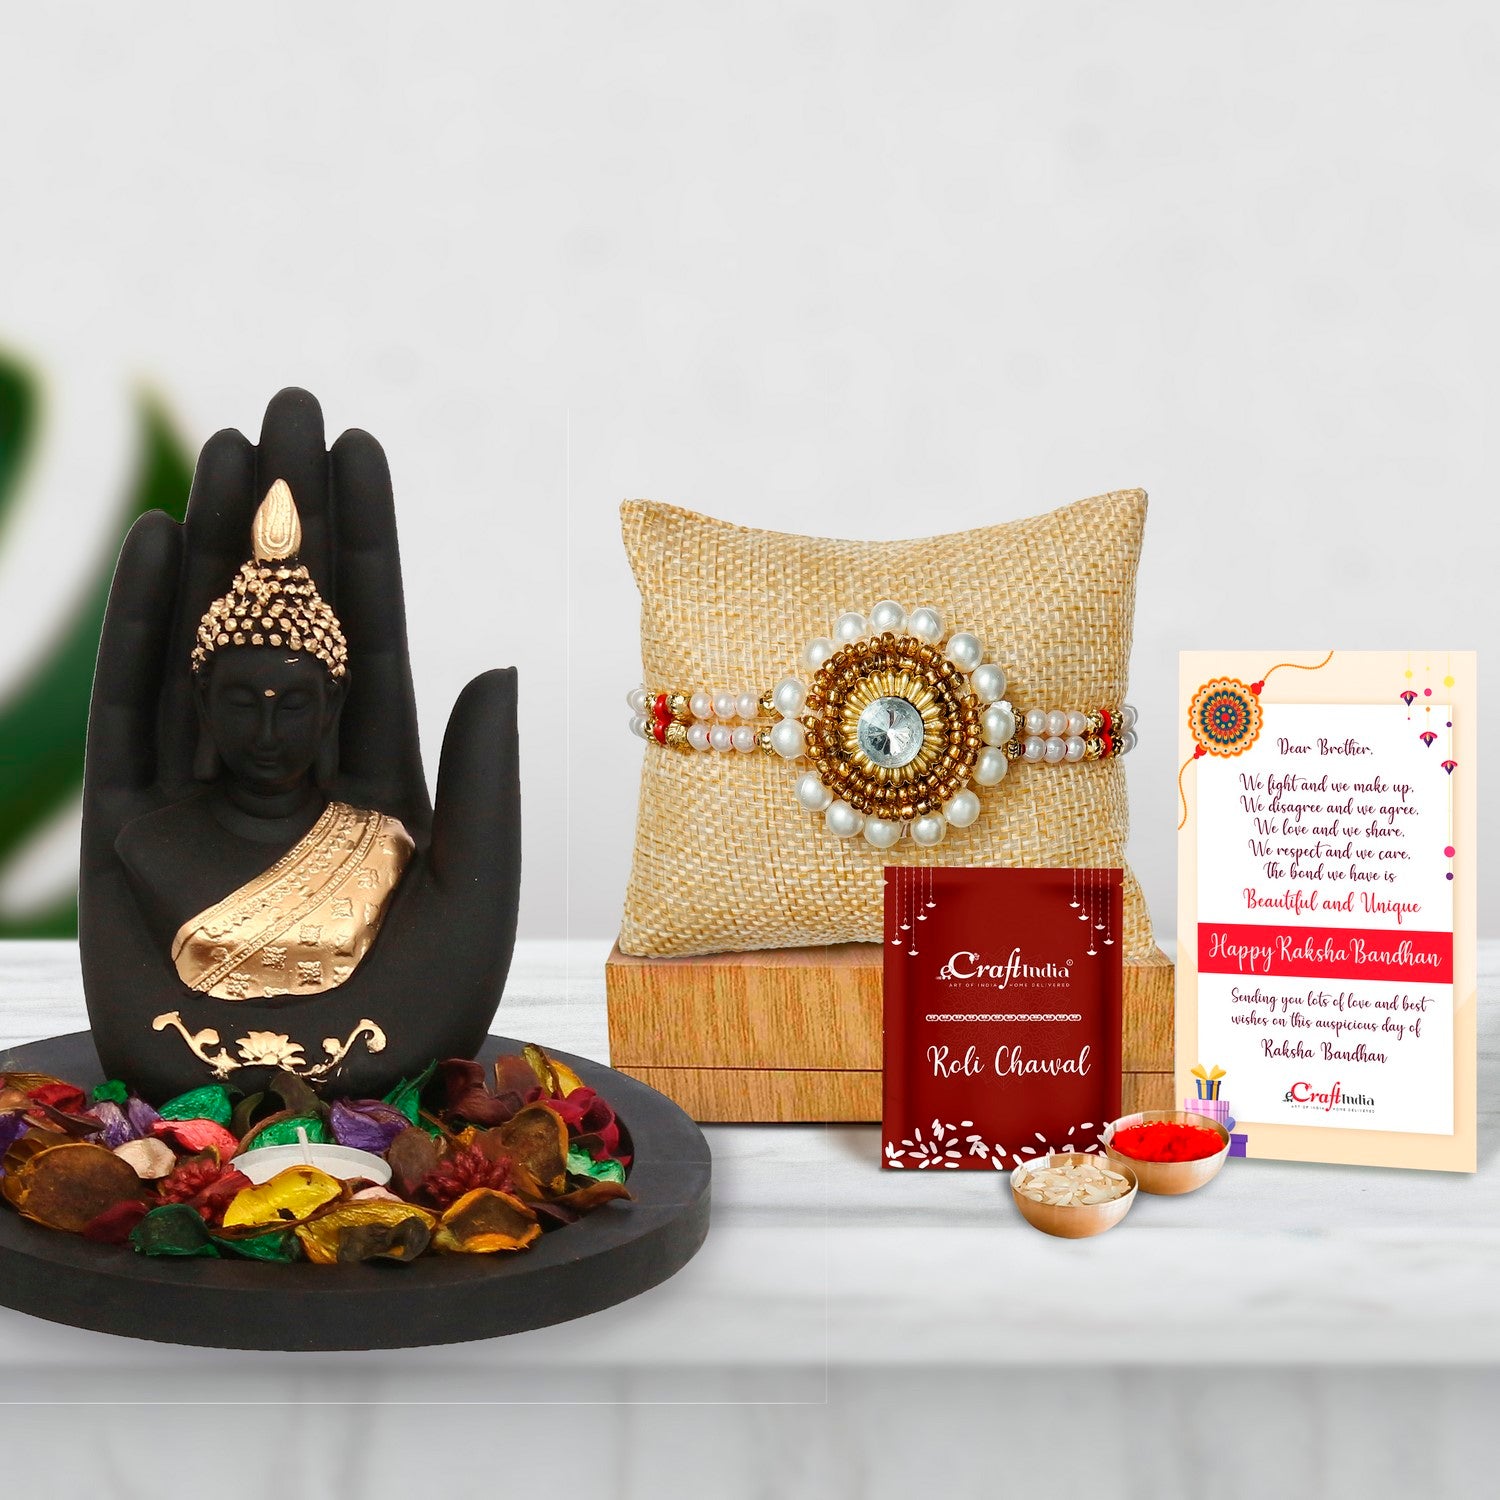 Designer Handcrafted Stone Pearl Rakhi with Golden Handcrafted Palm Buddha Decorative Showpiece with Wooden Base, Fragranced Petals and Tealight and Roli Chawal Pack, Best Wishes Greeting Card